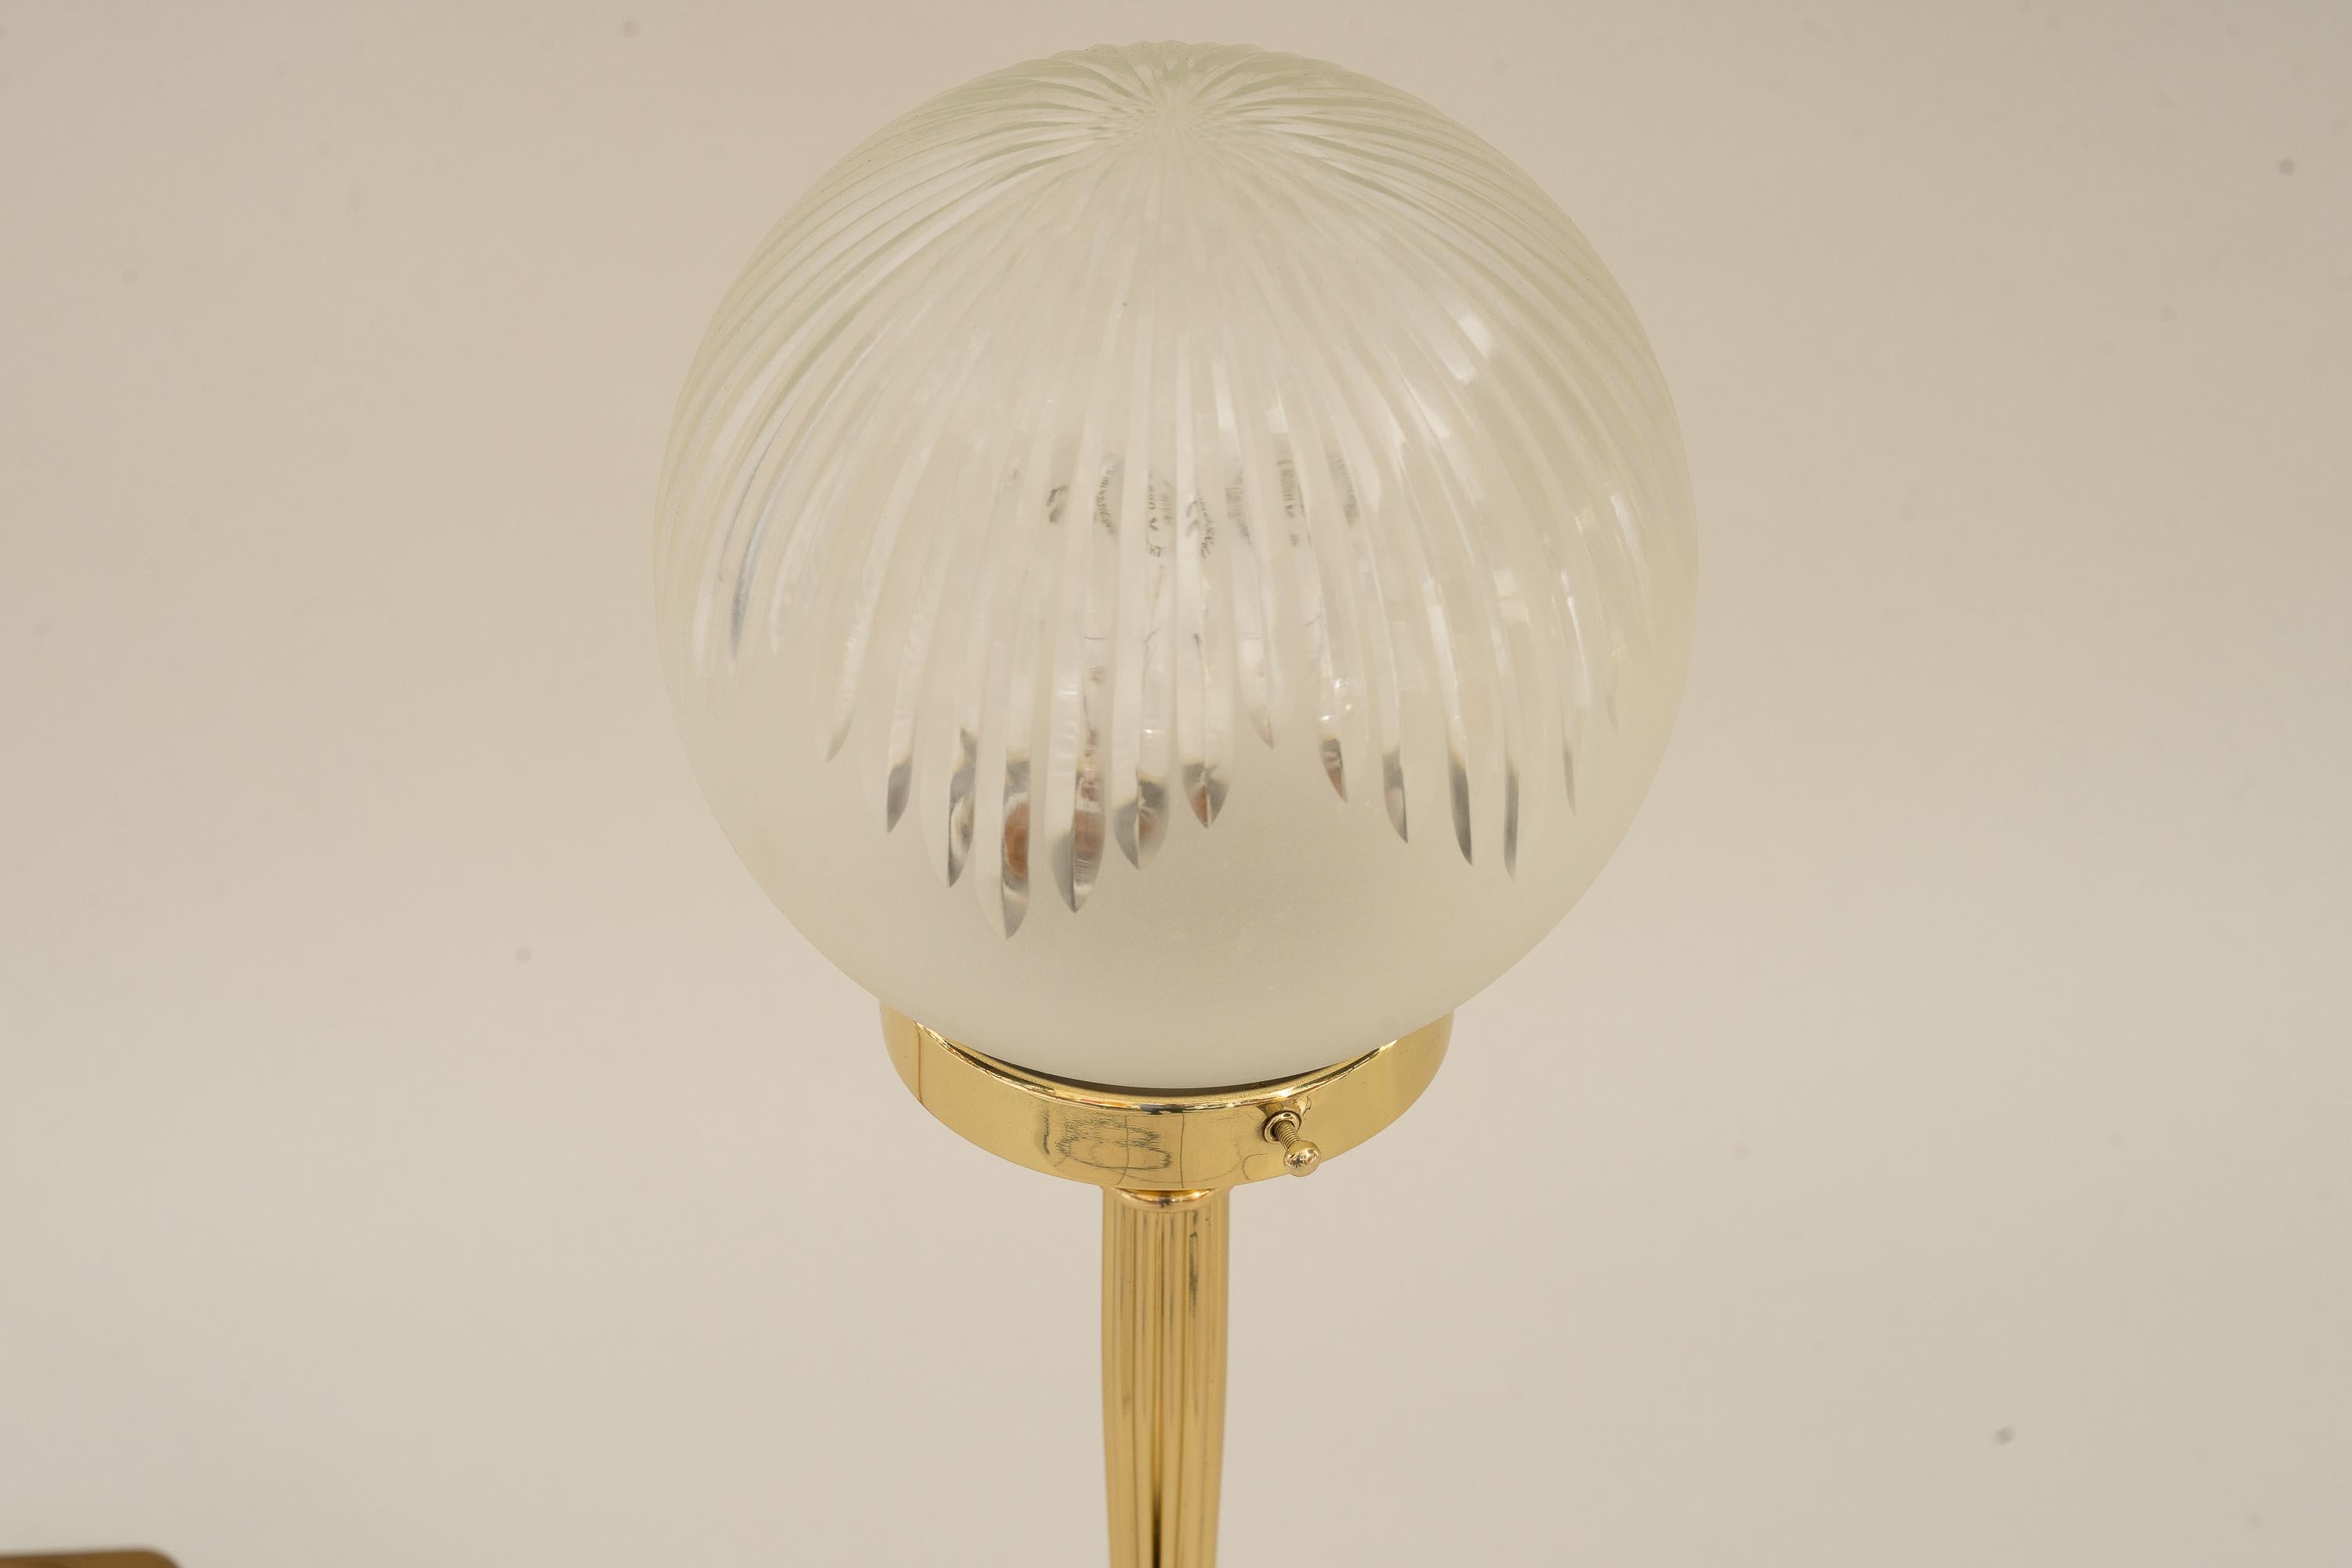 Early 20th Century Art Deco Table Lamp with Original Glass Shade Around 1920s